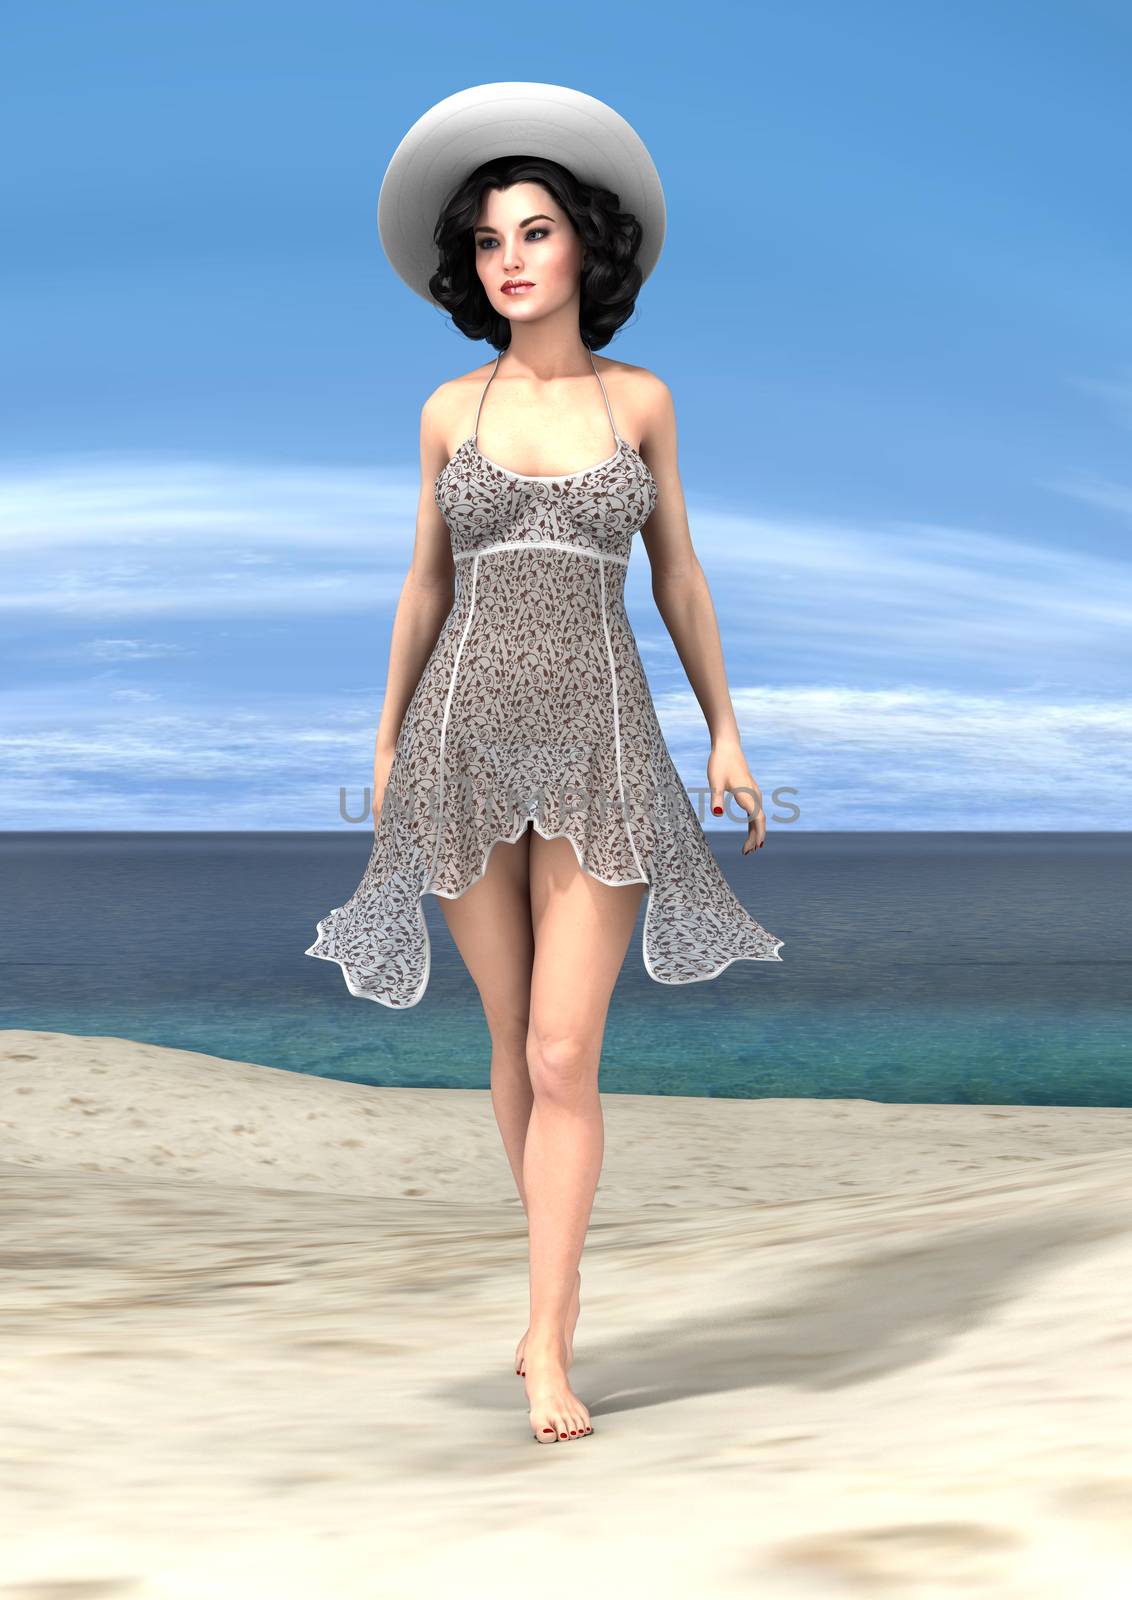 Young Woman on the Beach by Vac